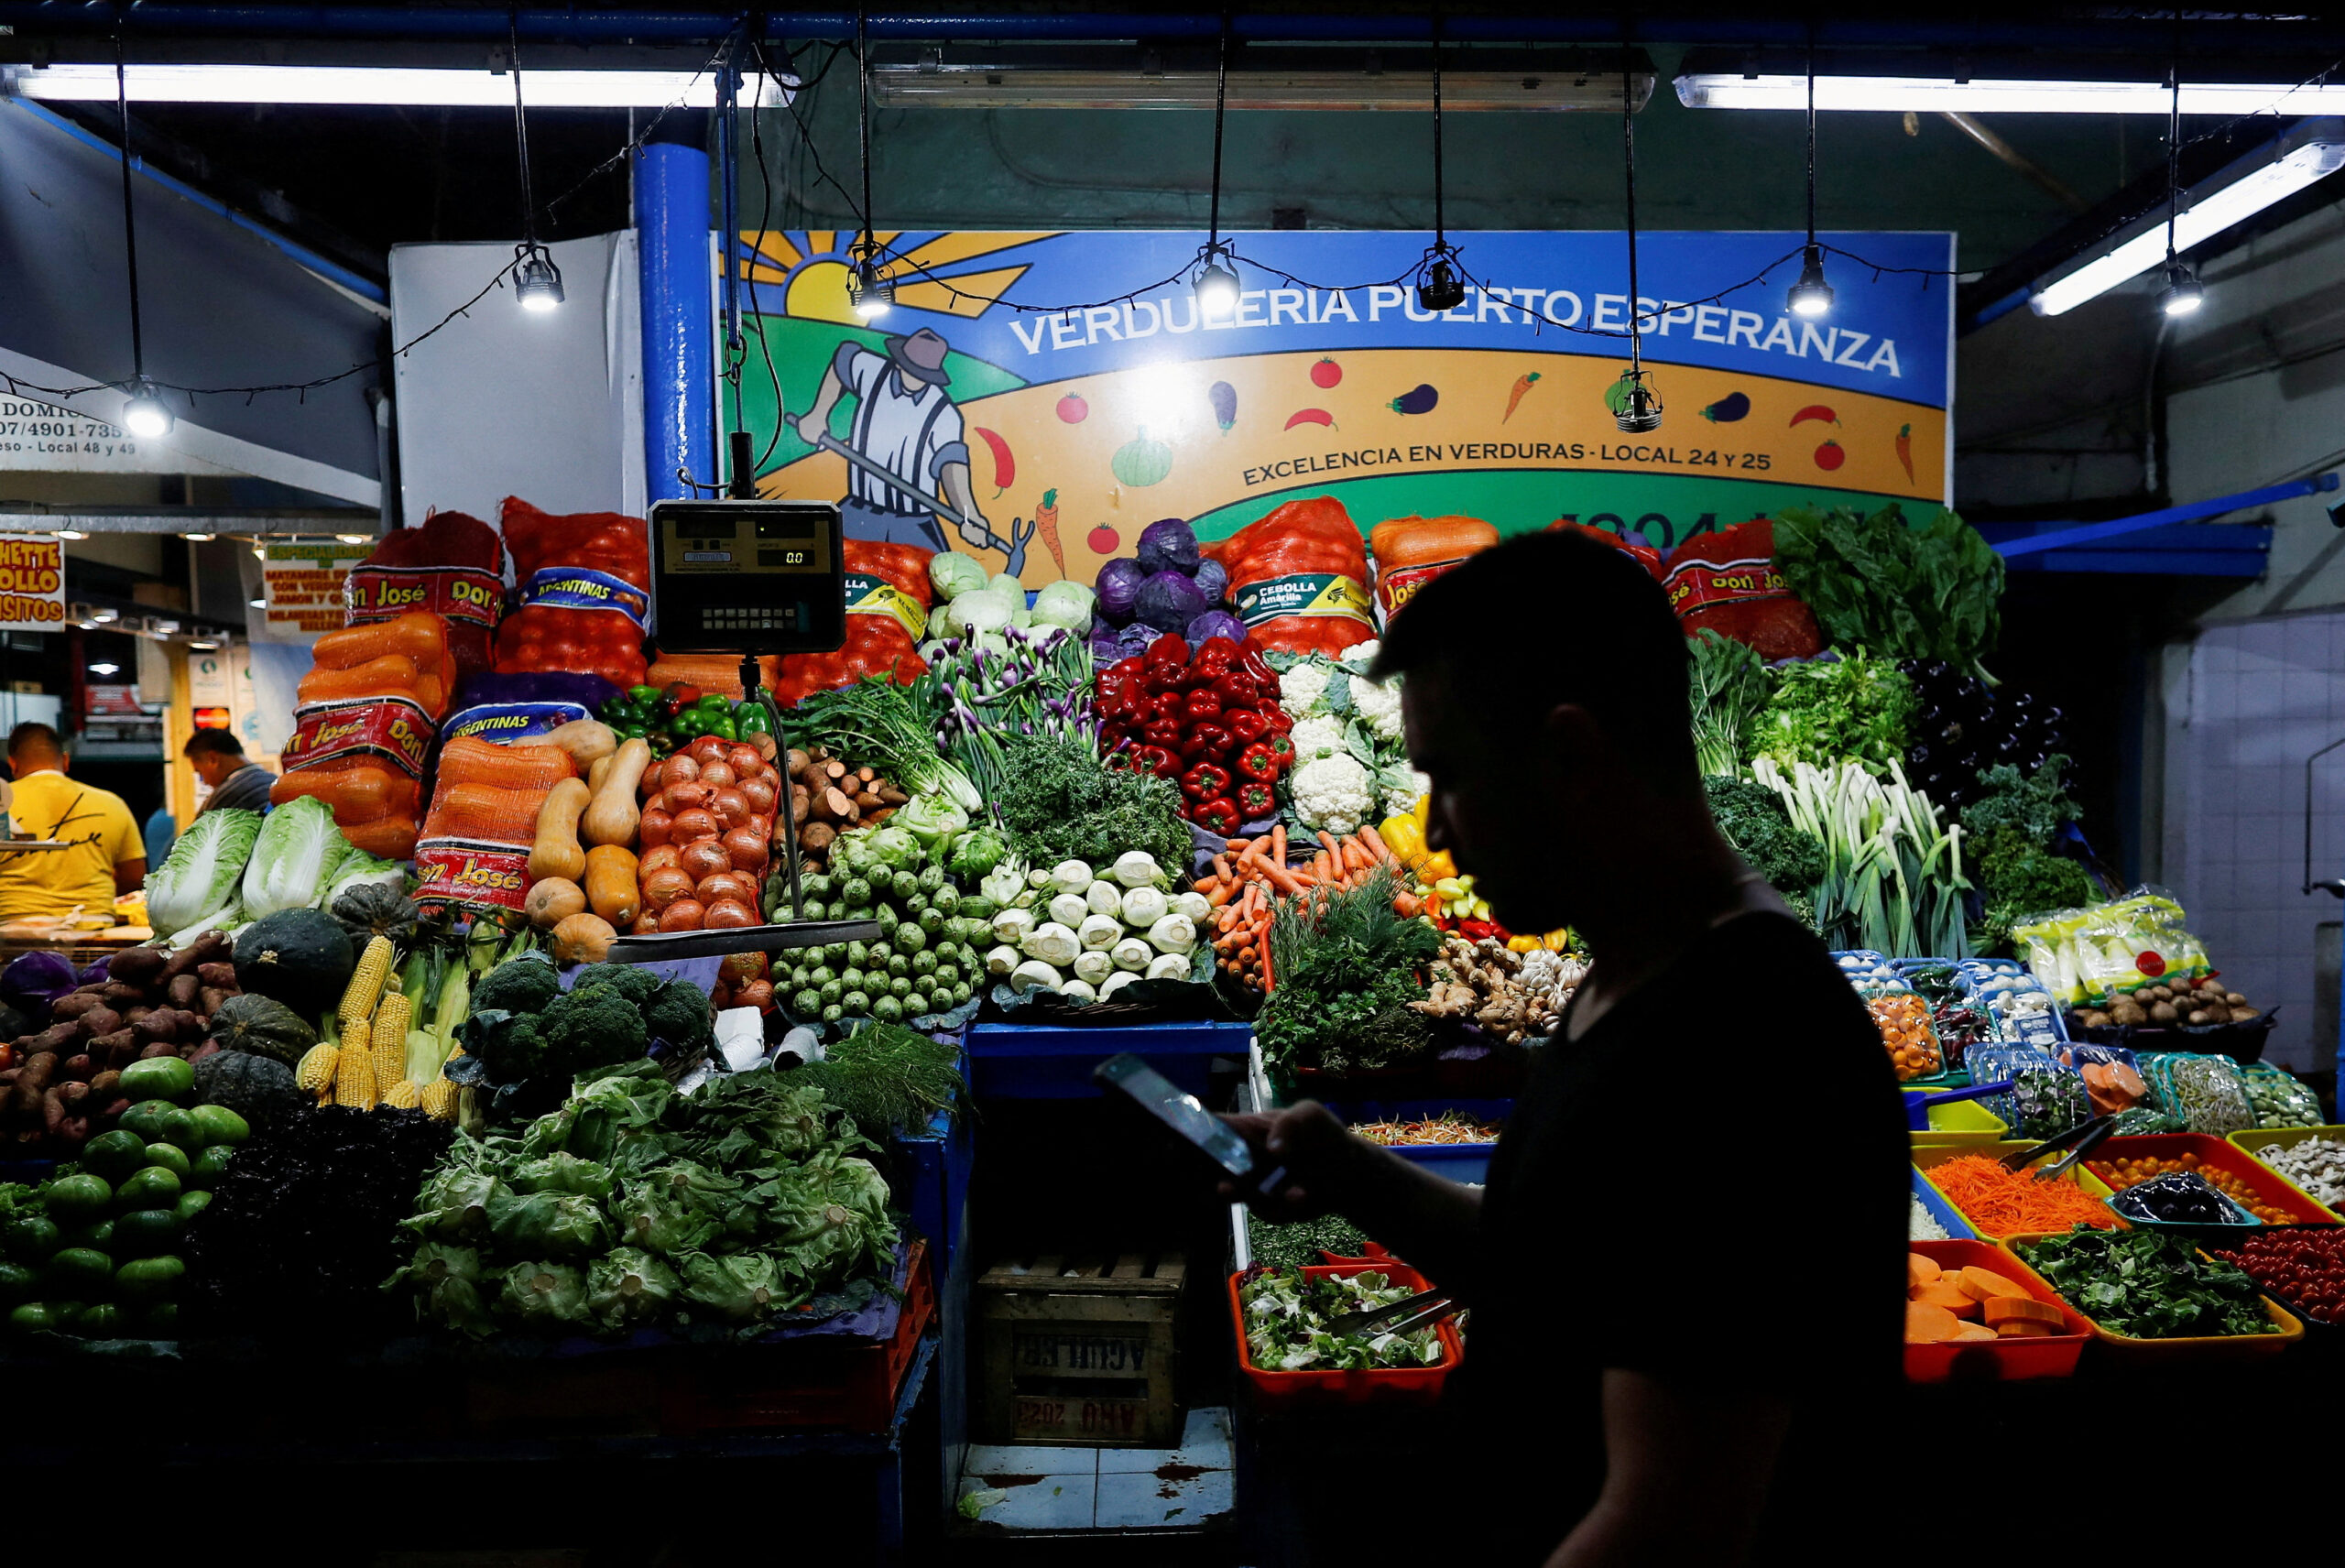 Monthly inflation rate hits 12.4%, a 32-year high